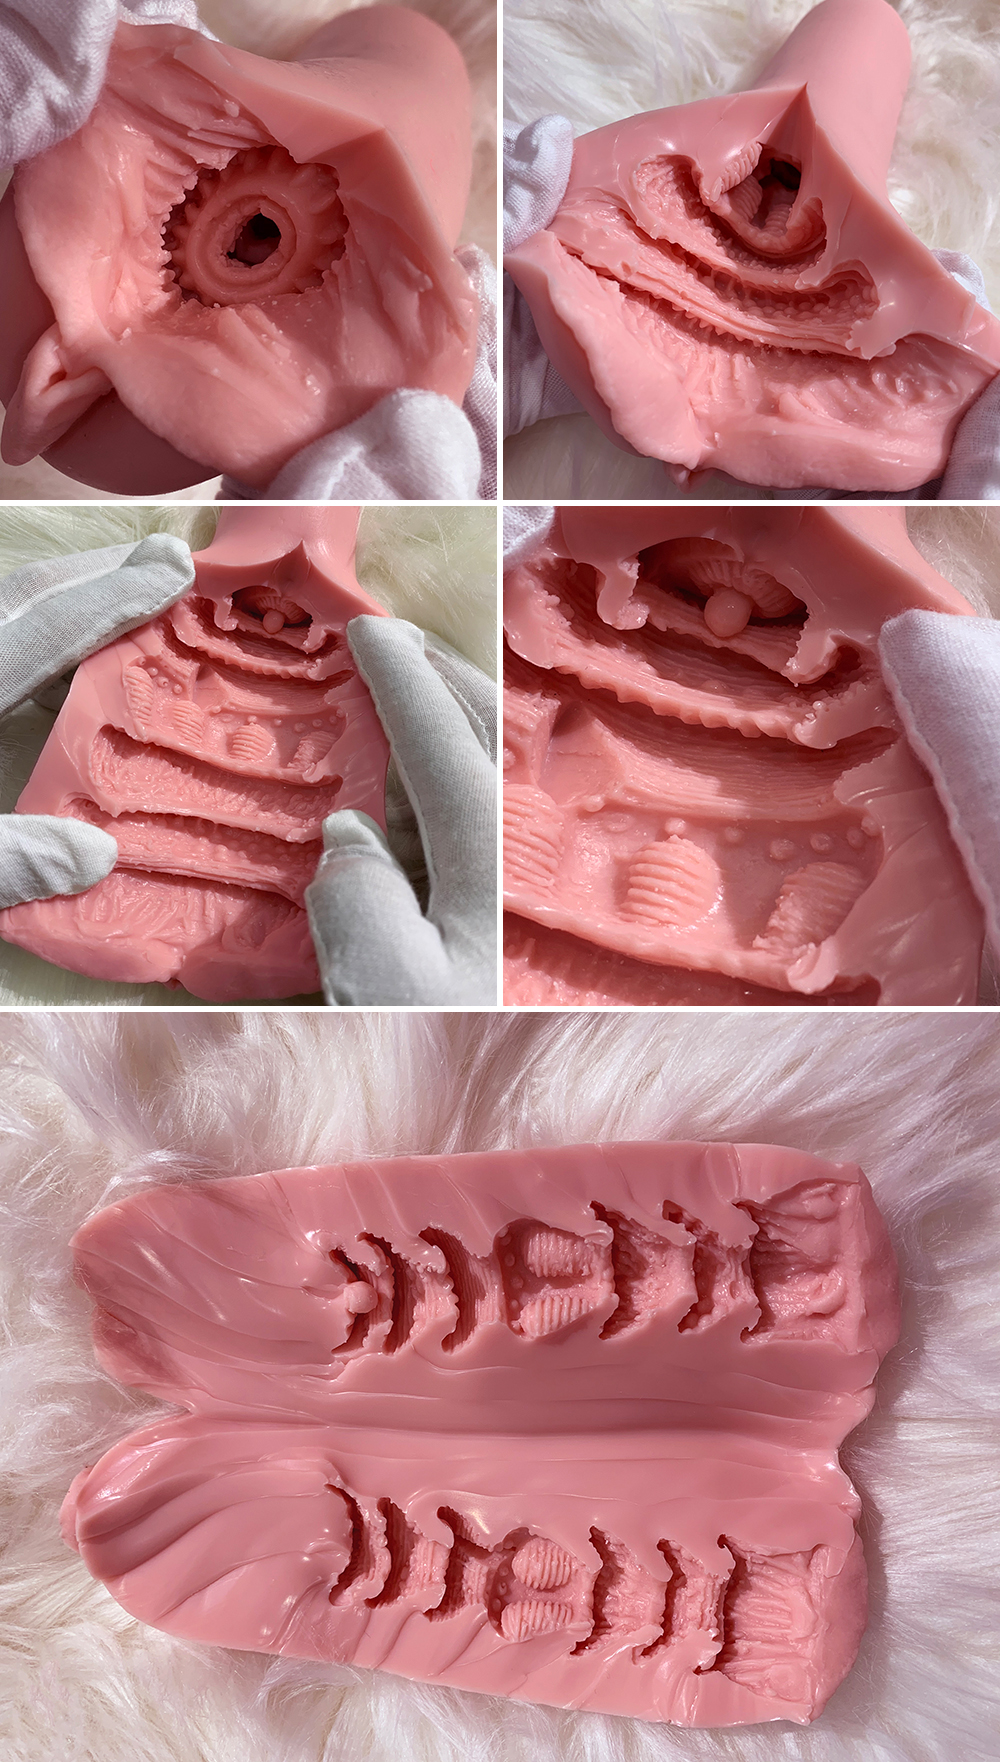 Gynoid Doll RZR|Realistic Silicone Sex Doll|Vagina cavity|Inside structure of vagina cavity|M14:11cm